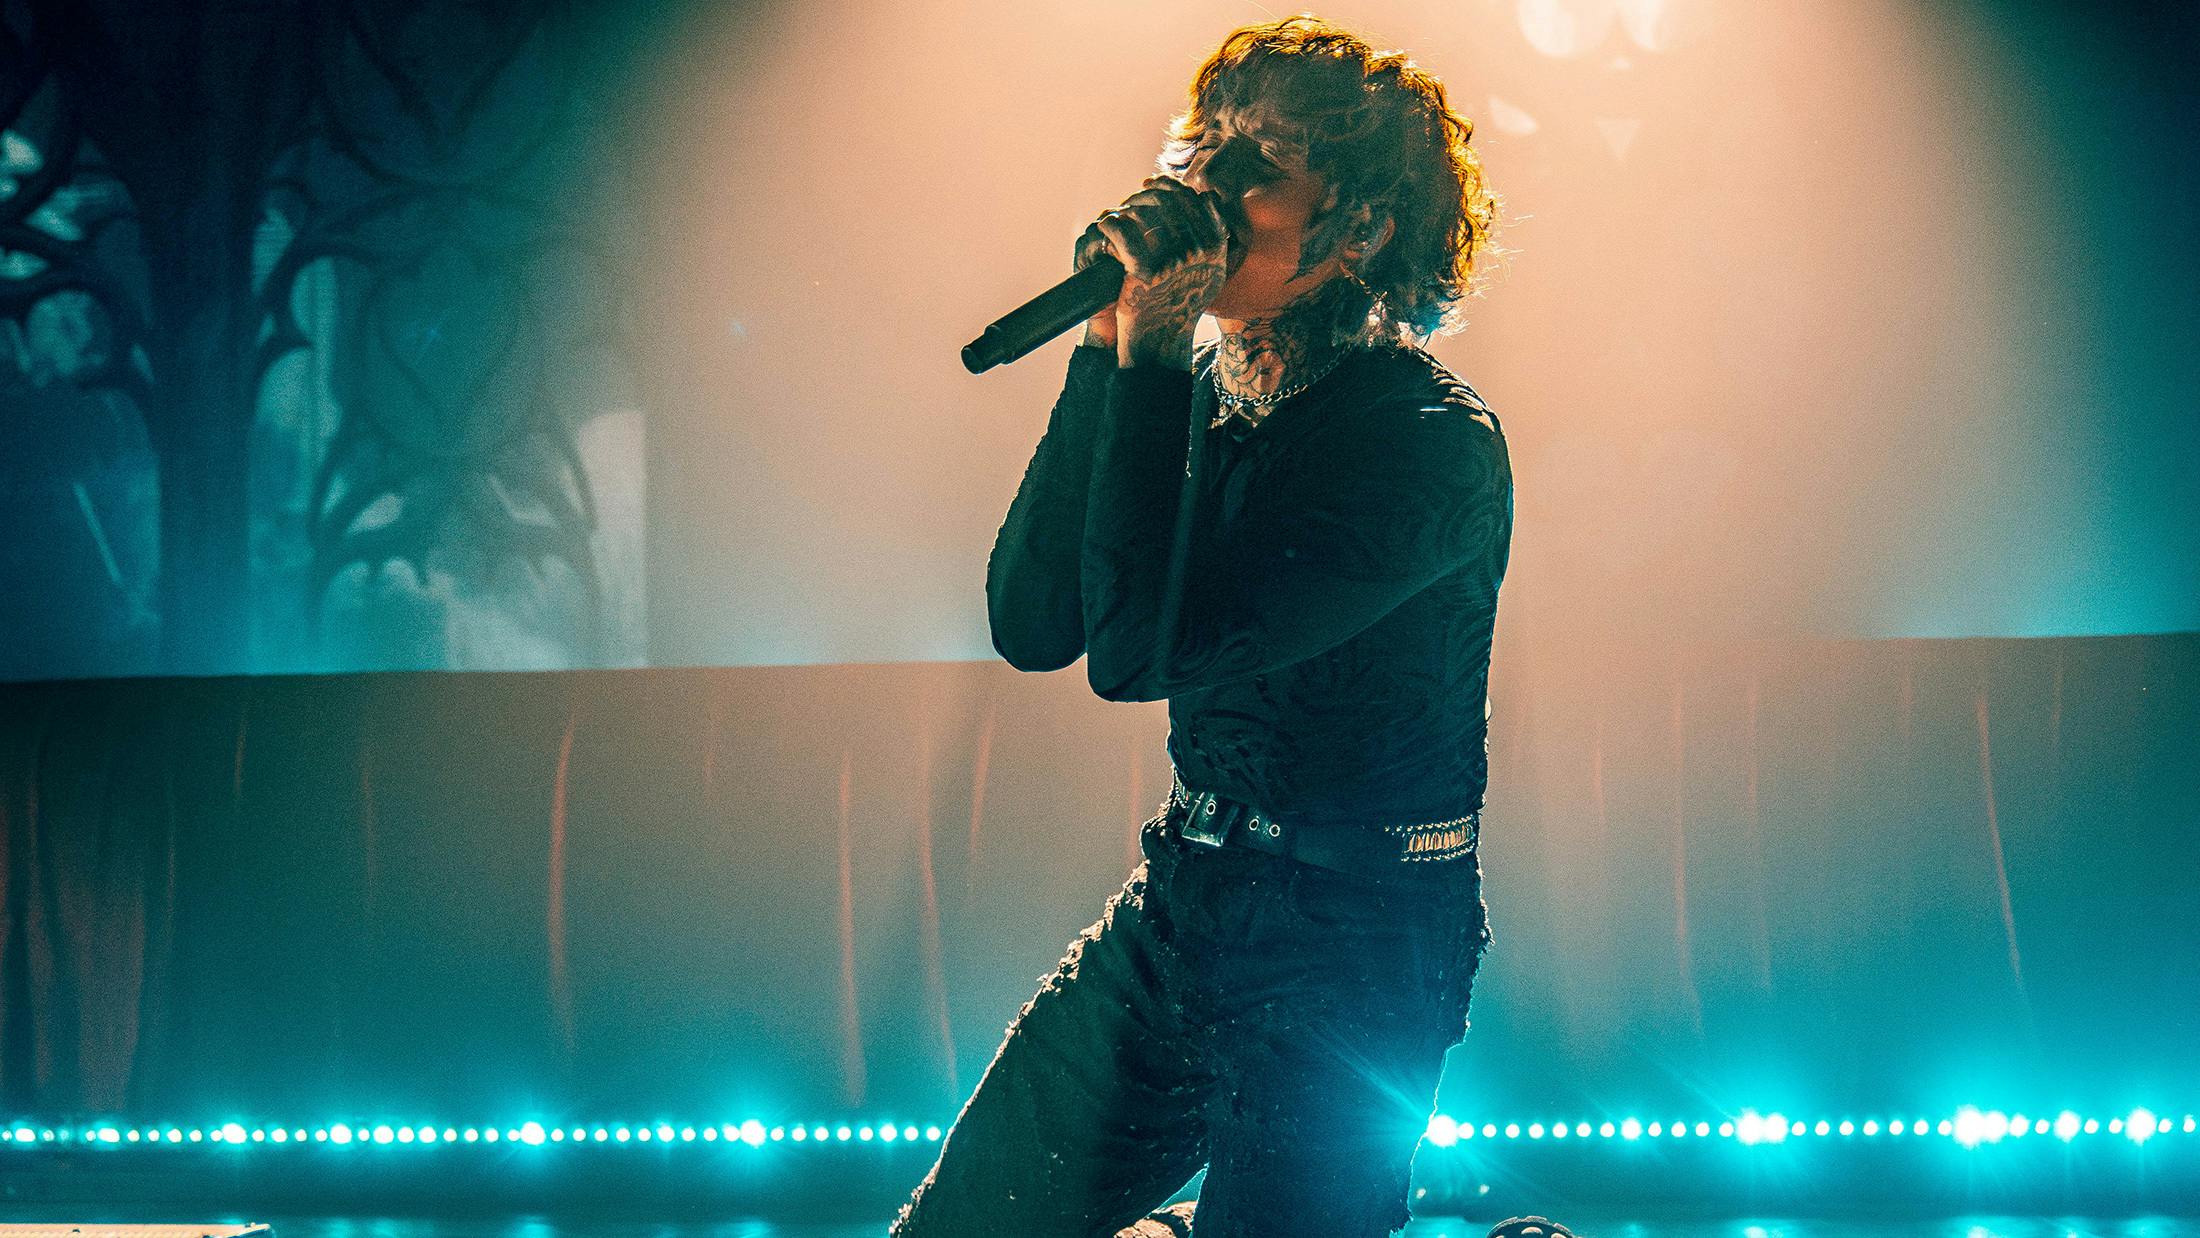 In pictures: Bring Me The Horizon’s epic show with Spiritbox in Las Vegas